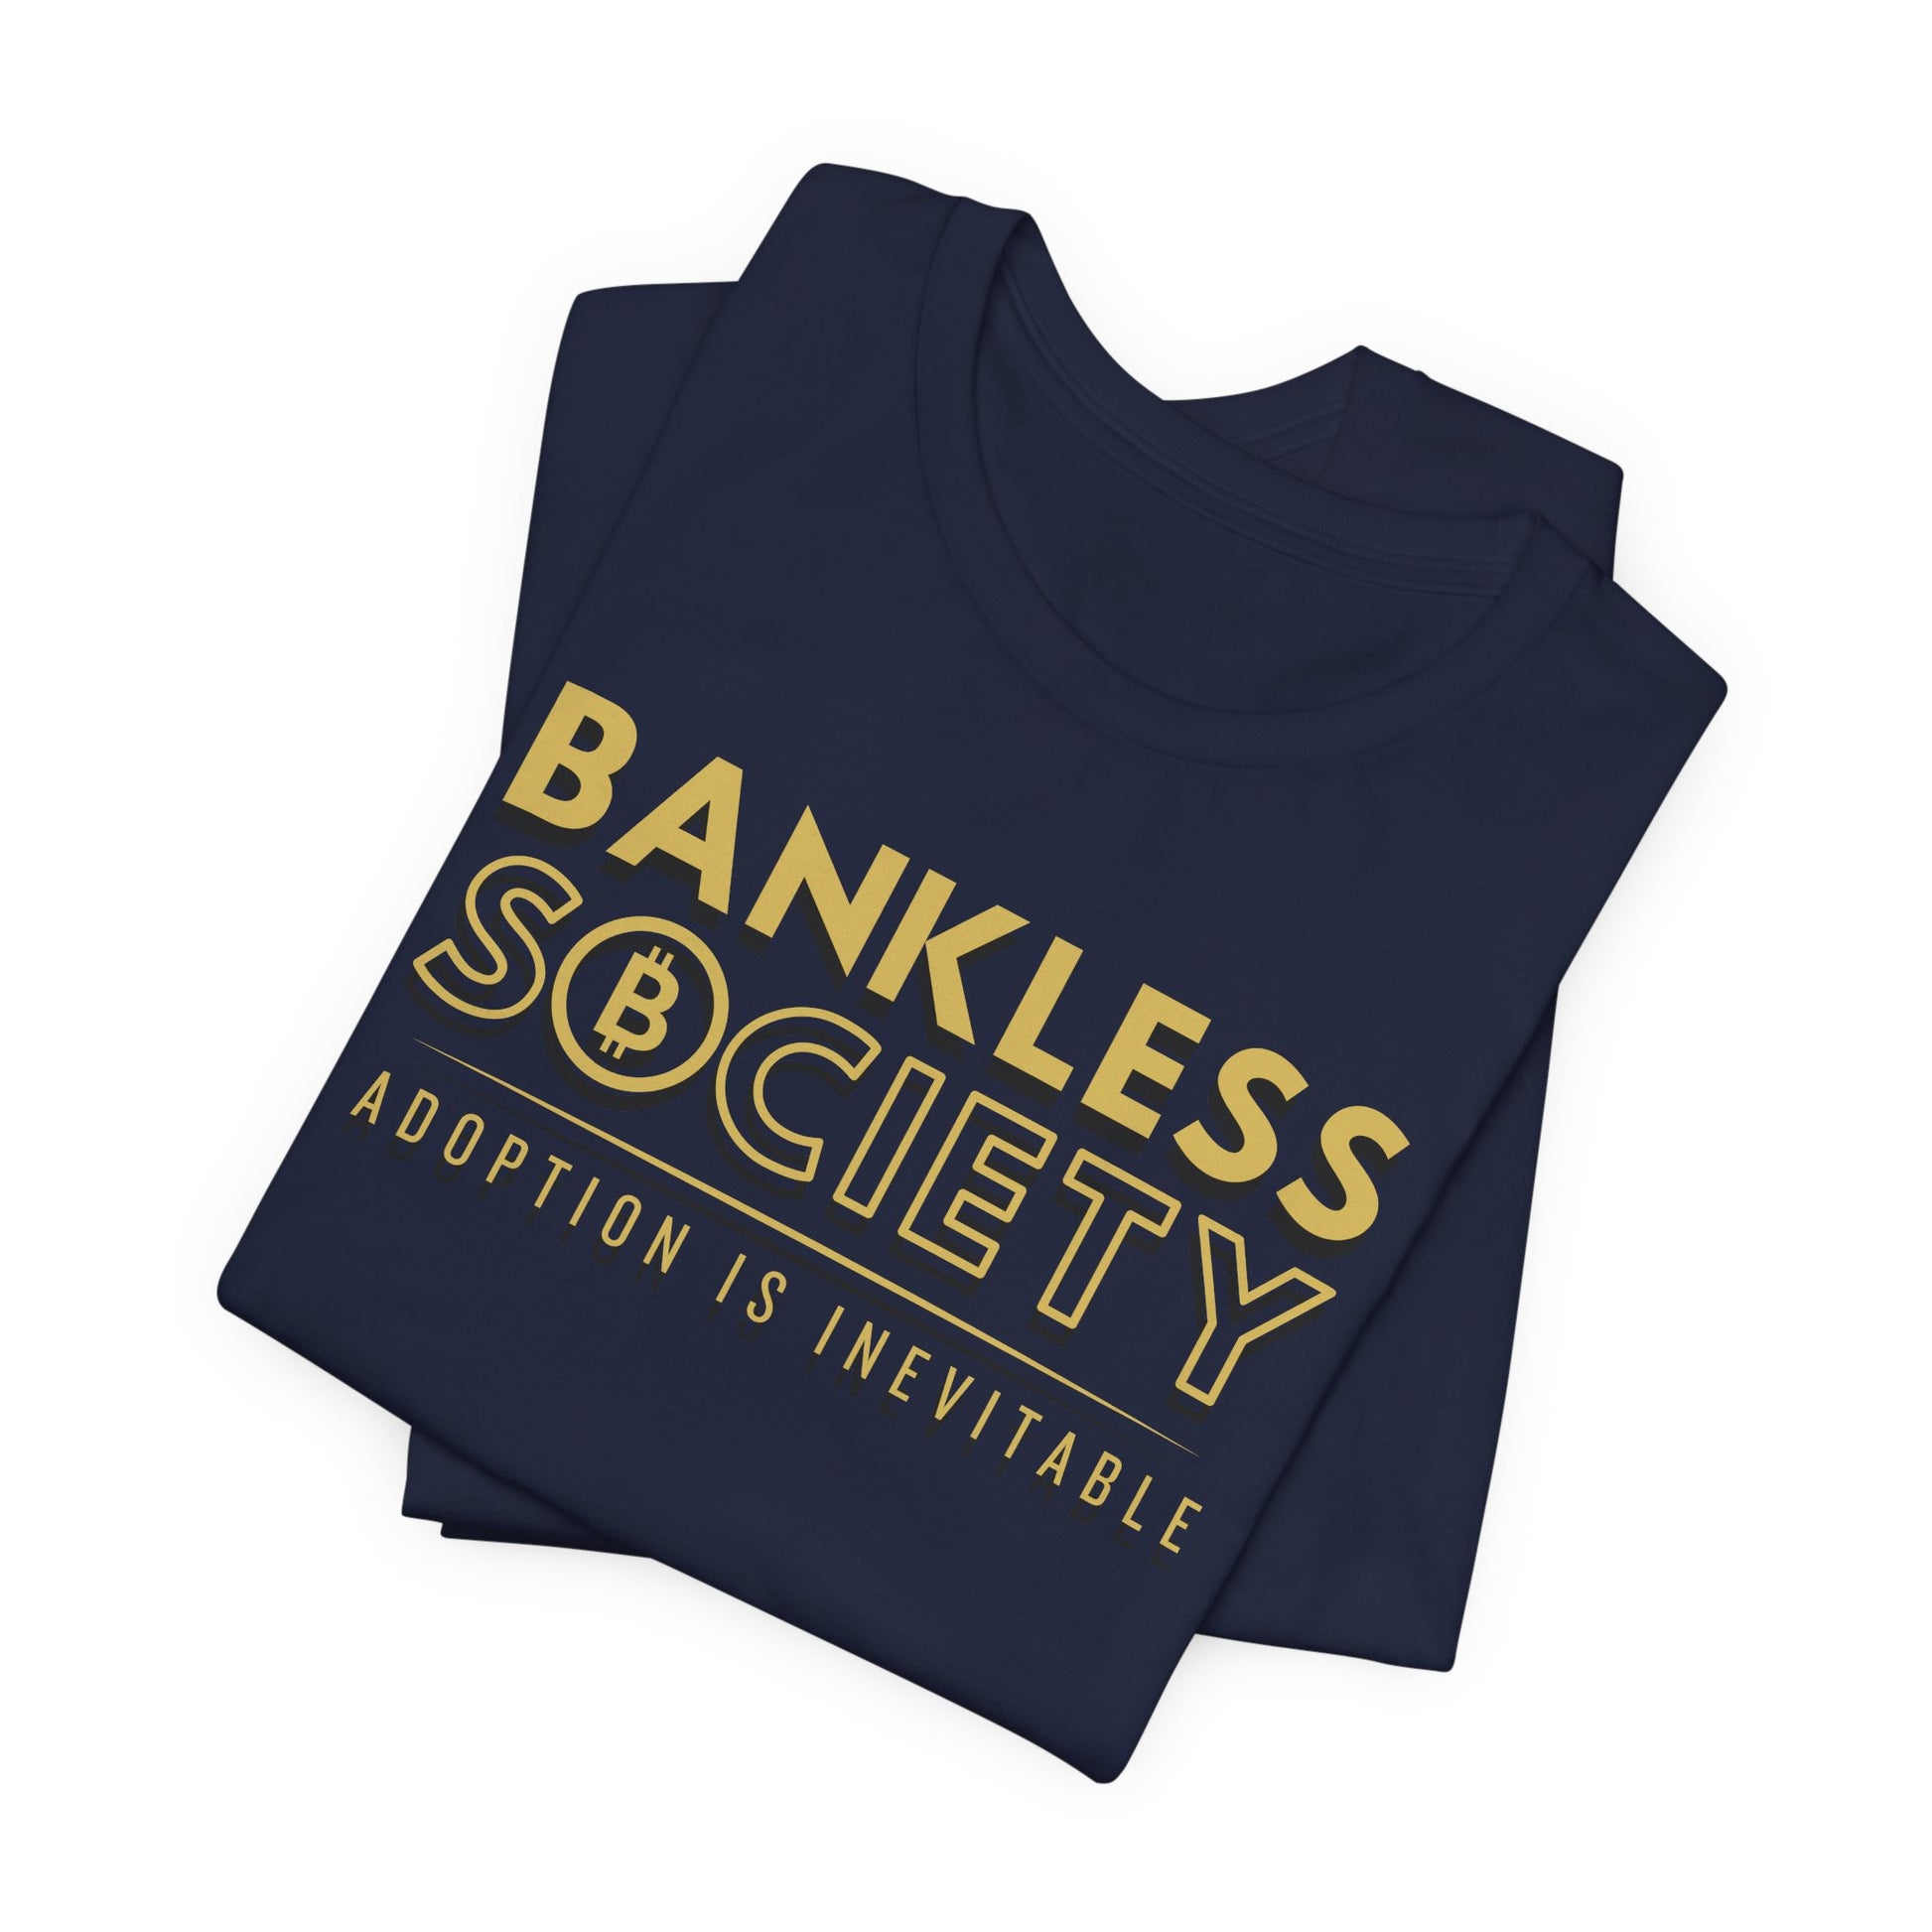 Navy Bella Canvas 3001 unisex t-shirt. Bankless Society, Adoption is Inevitable